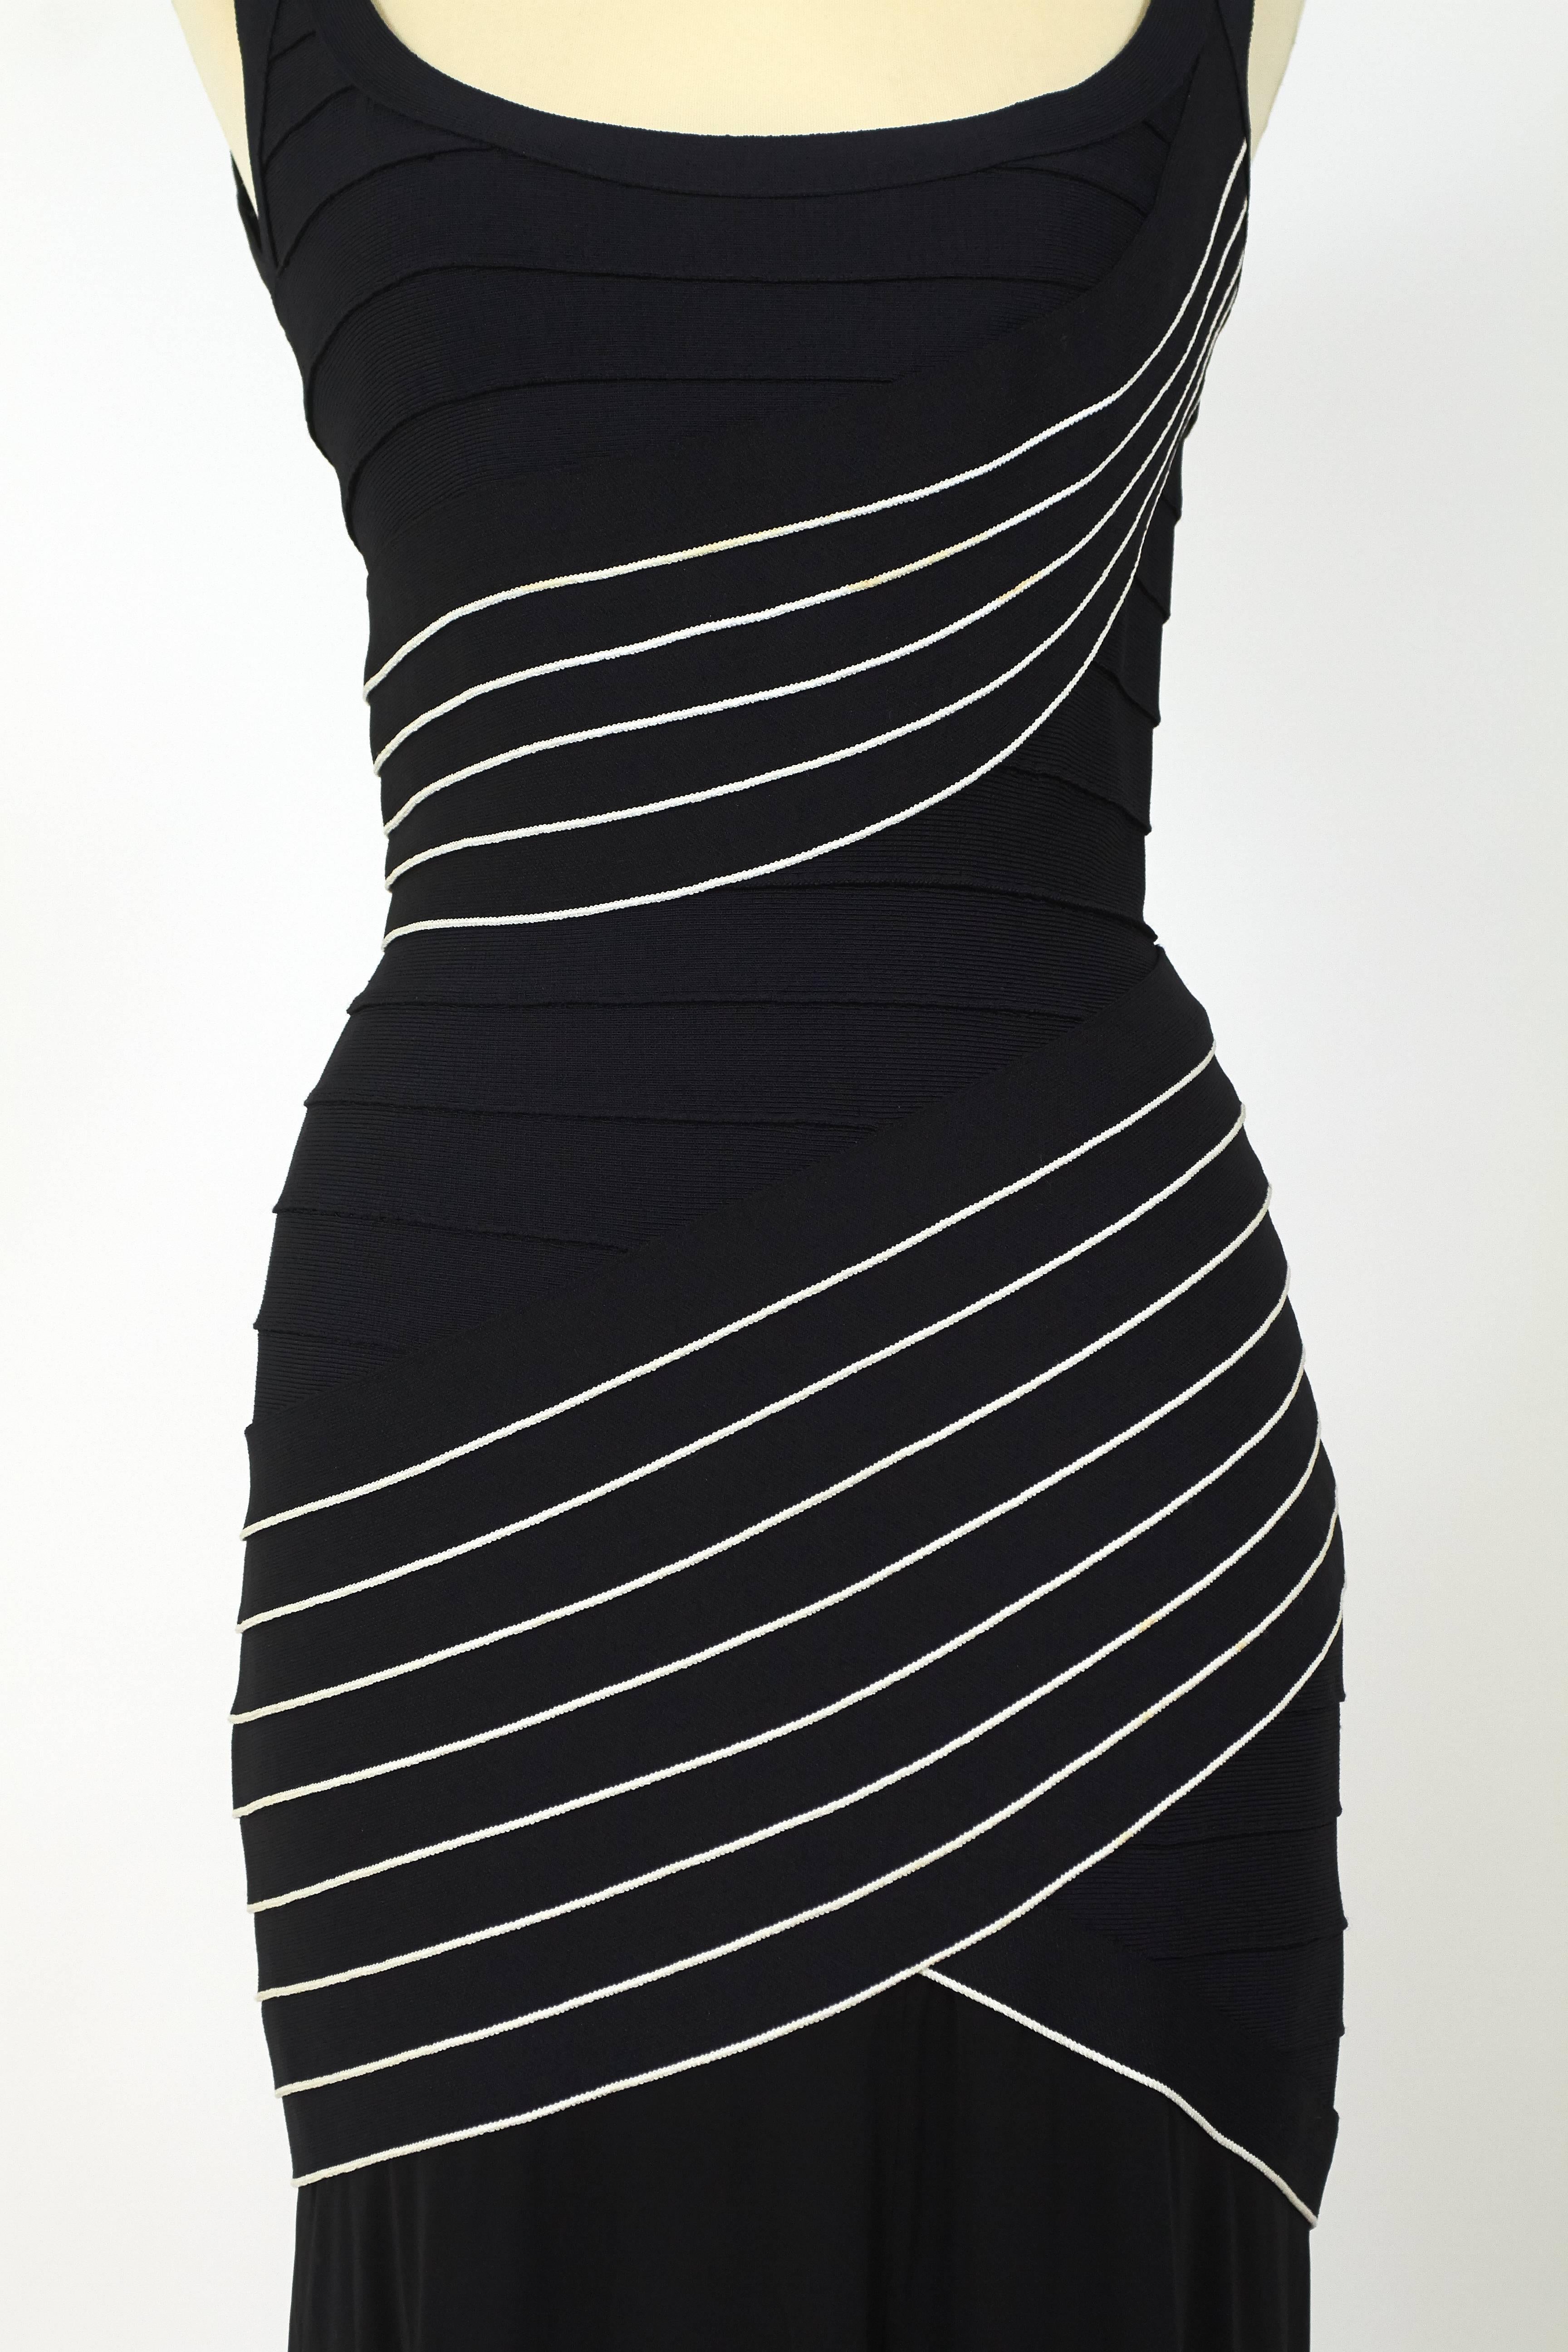 1990s Herve Leger Couture Black and White Bandage Long Dress 1